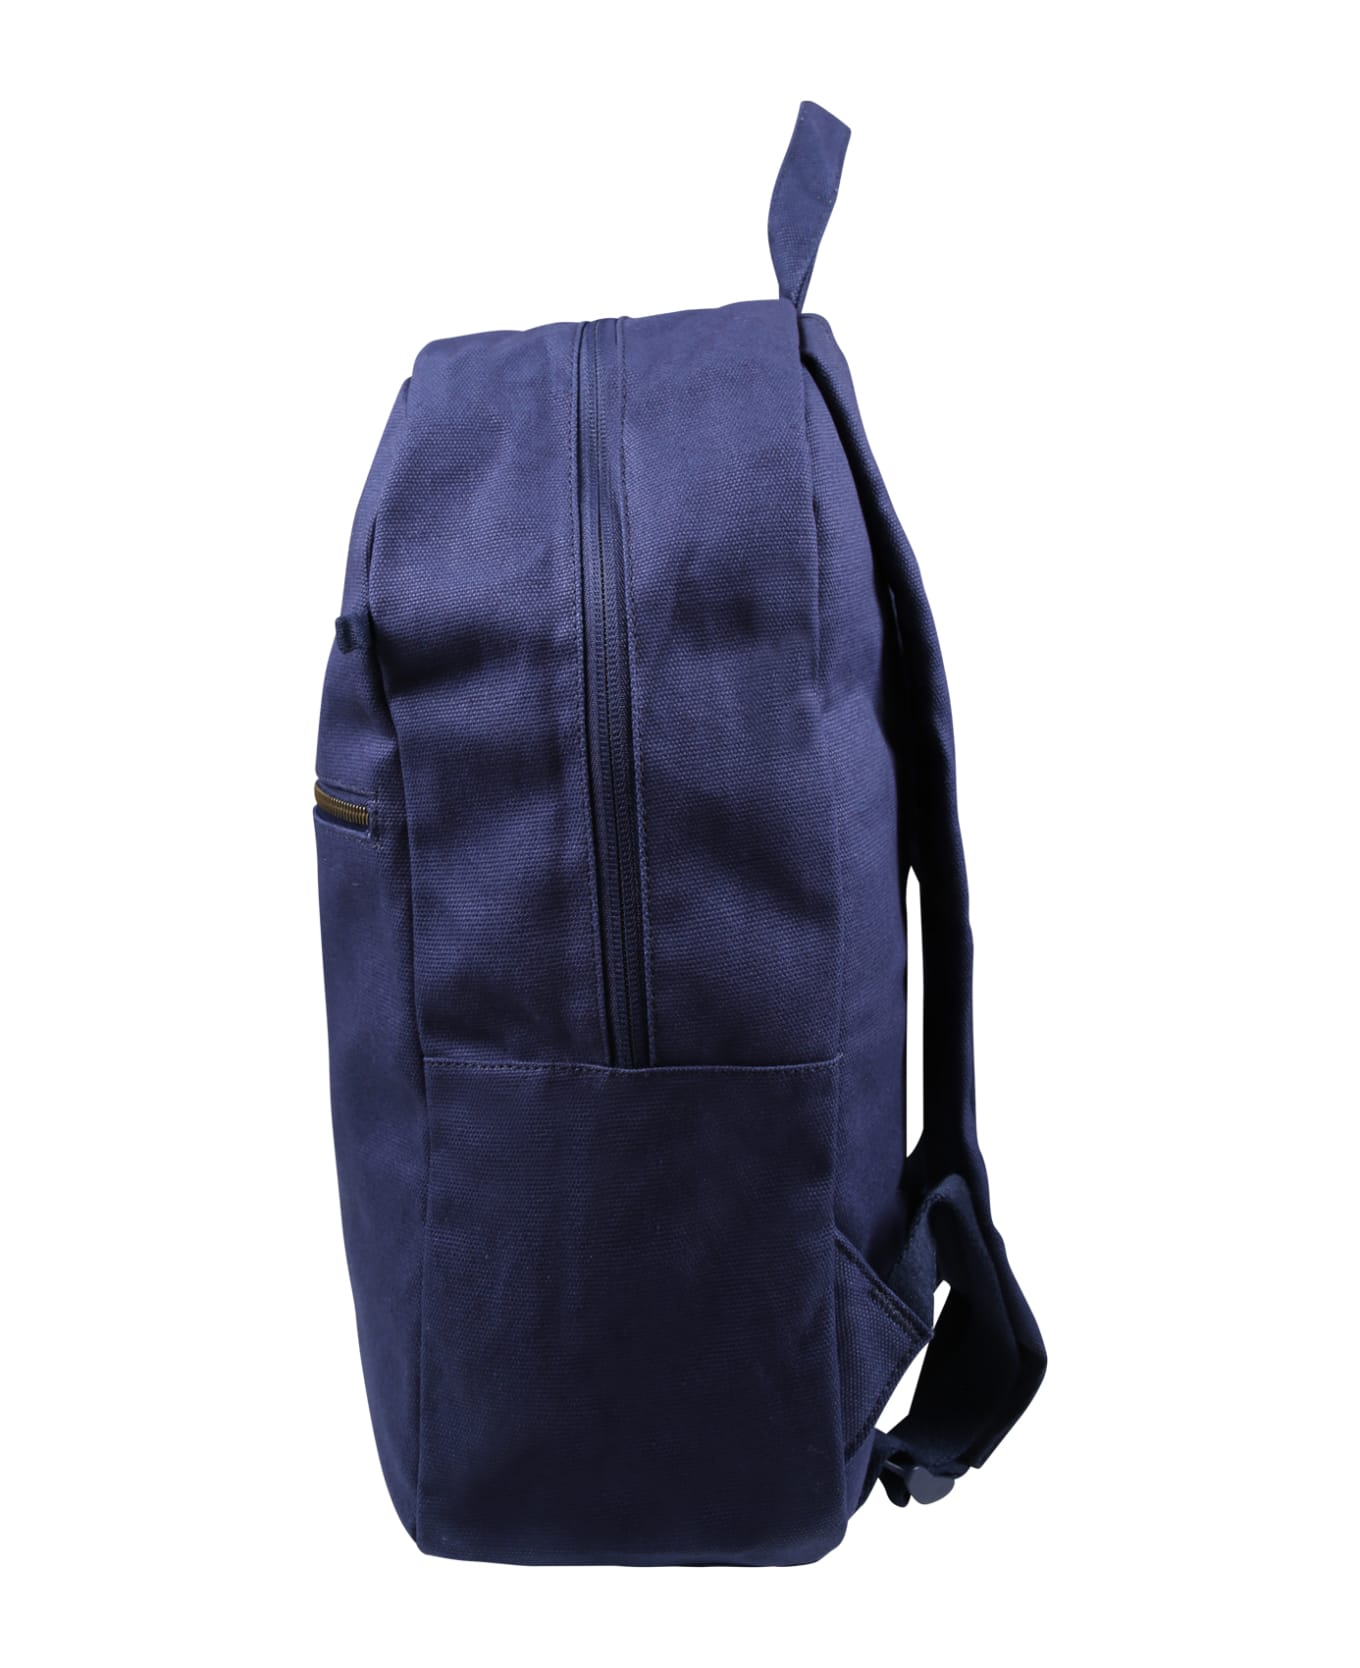 Ralph Lauren Blue Backpack For Kids With Logo - Blue アクセサリー＆ギフト